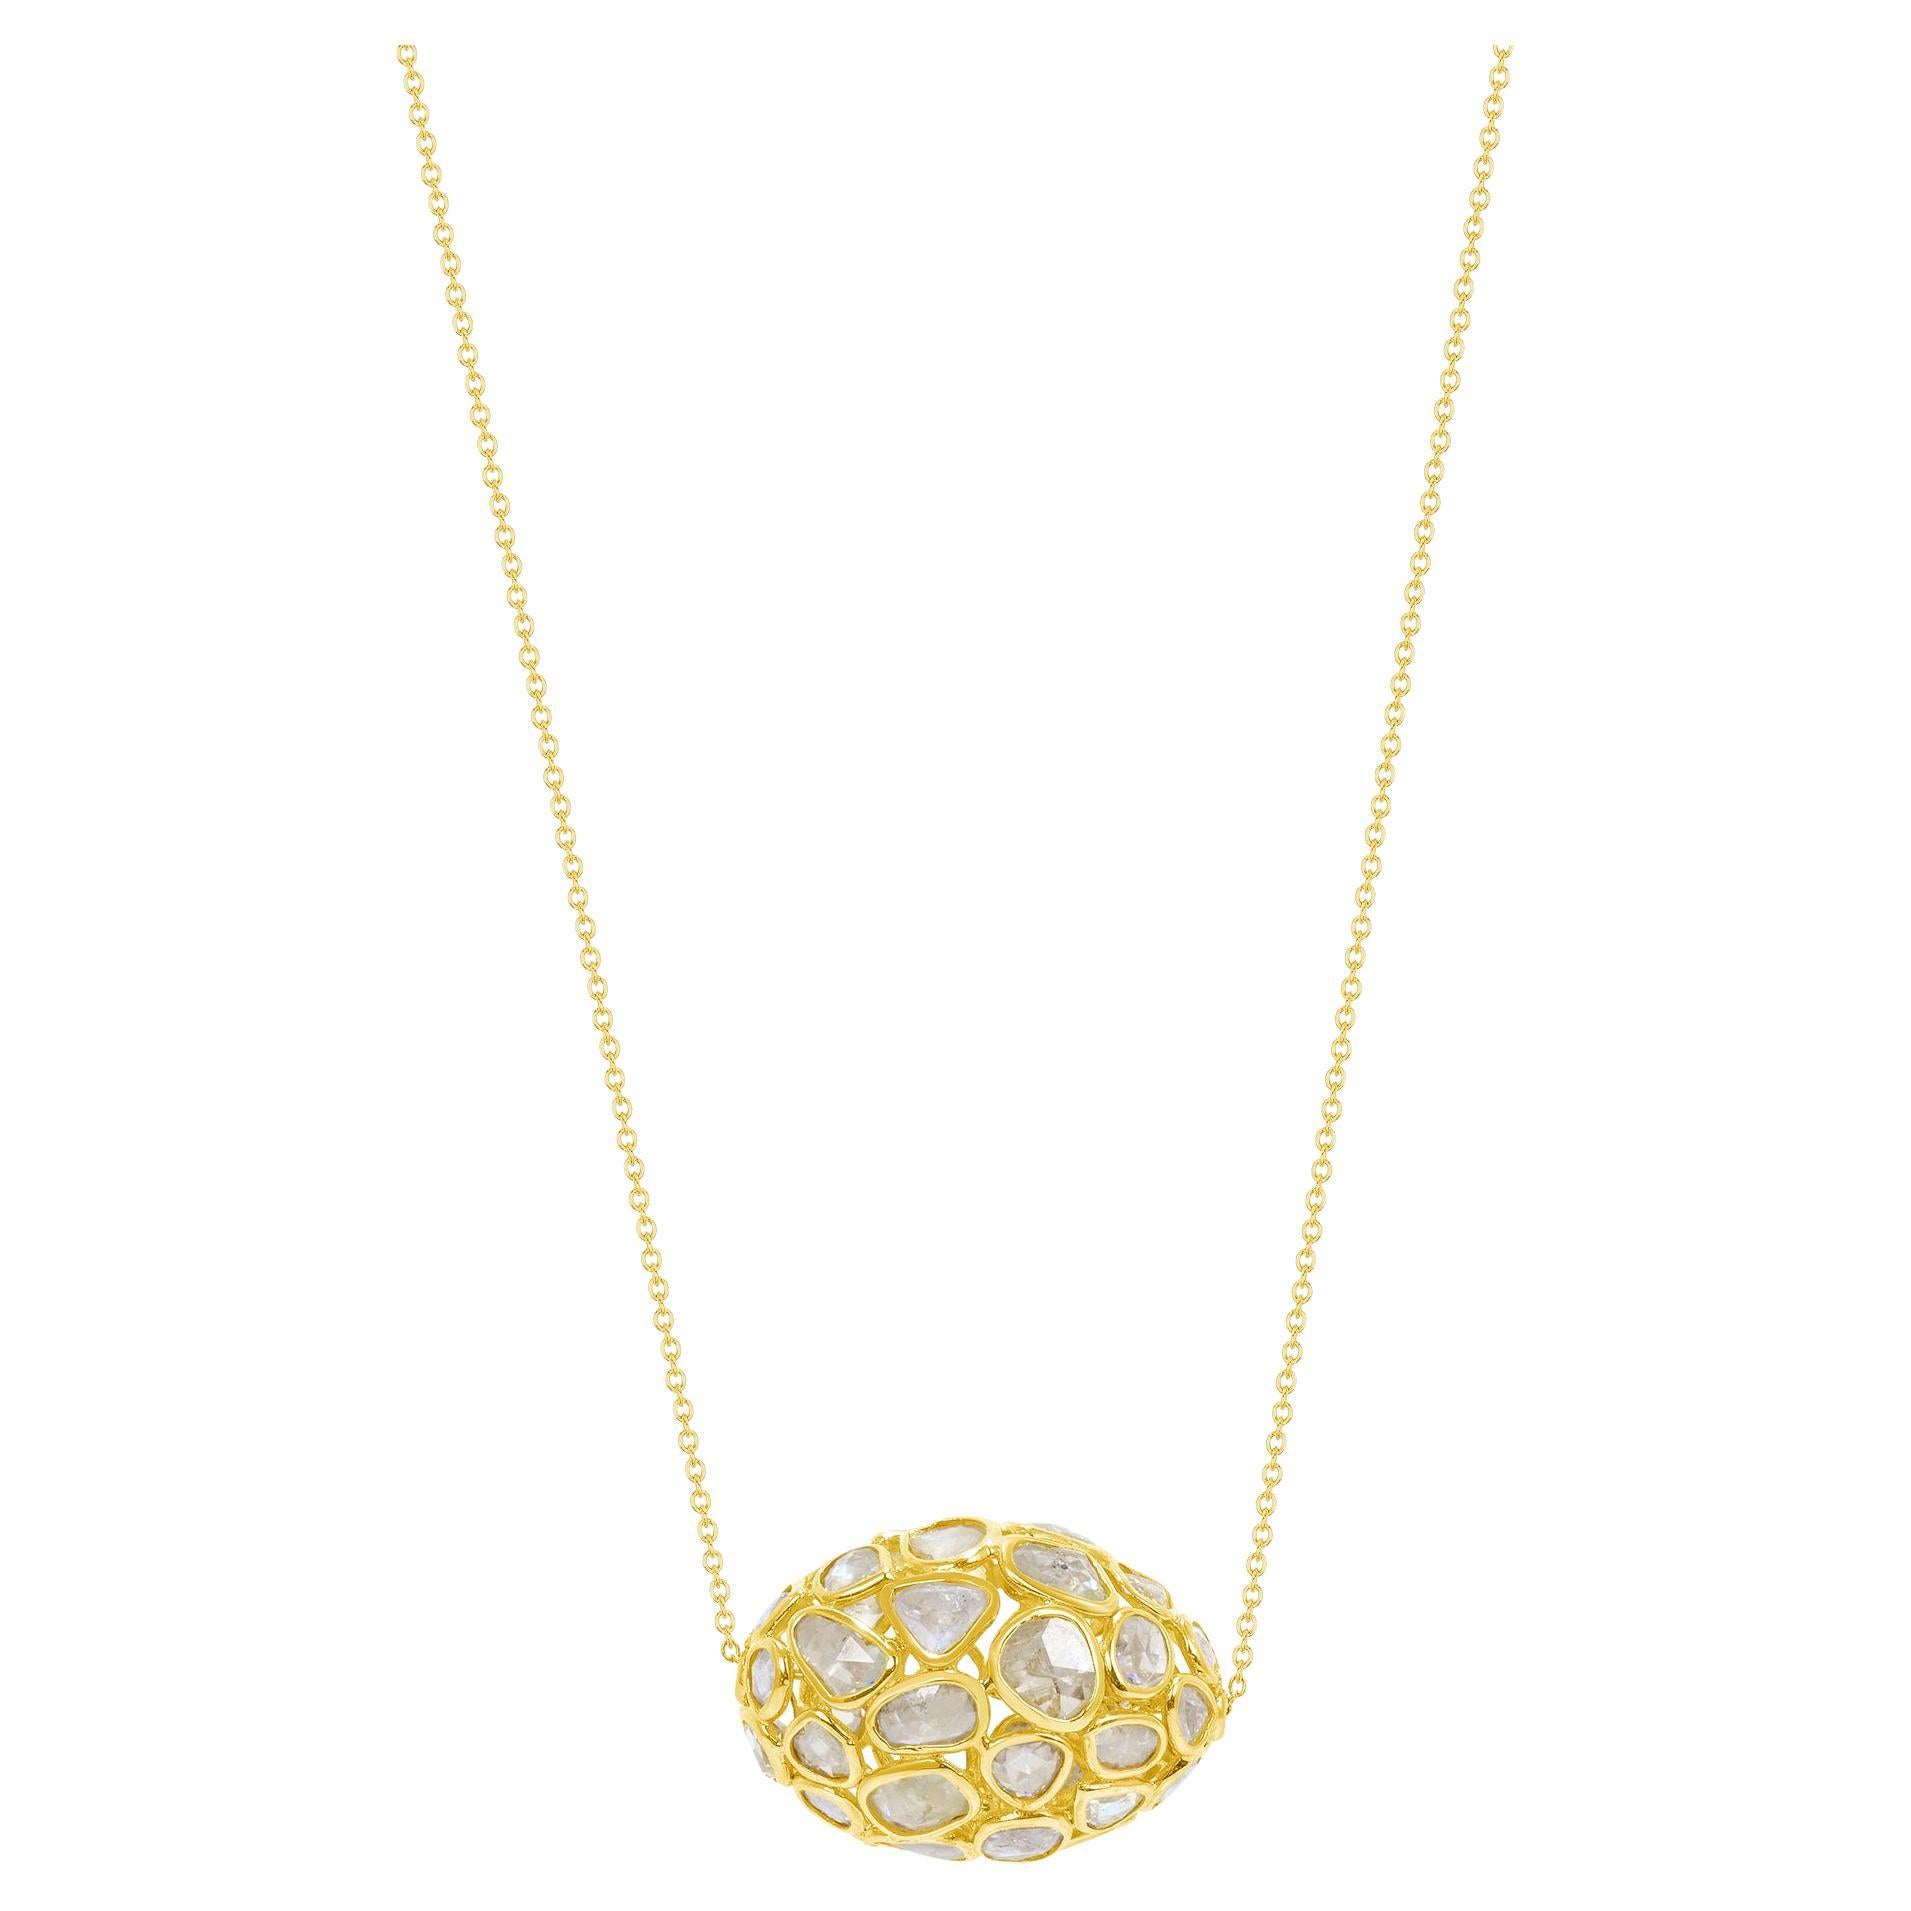 8.39 Carat Total Weight Diamond Yellow Gold Pendant Necklace, in Stock For Sale